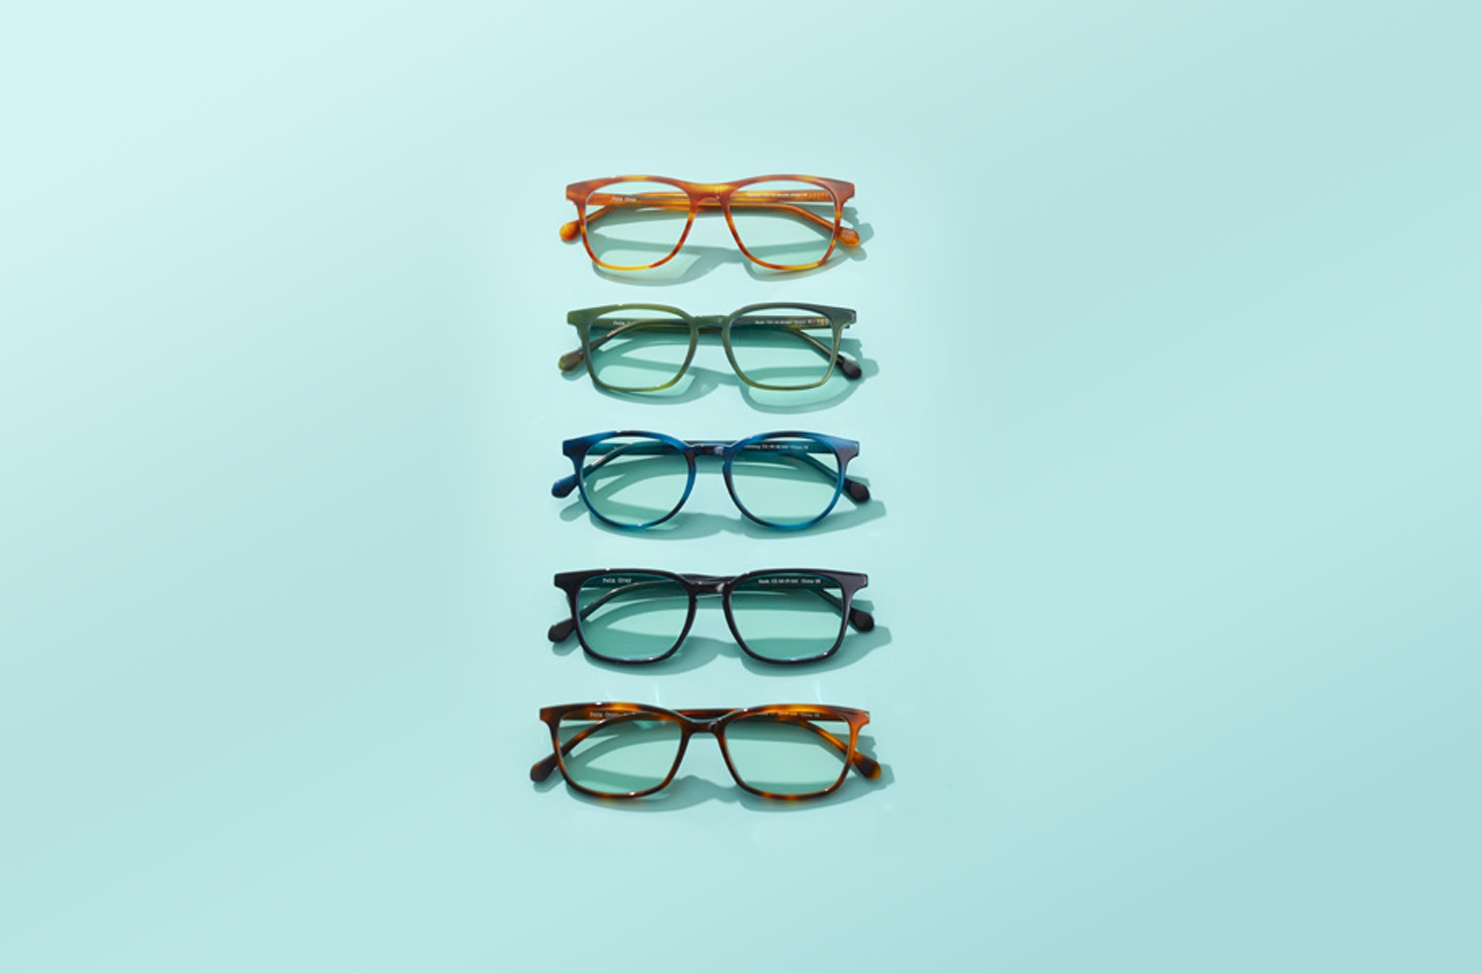 Tips for Good Glasses Selection